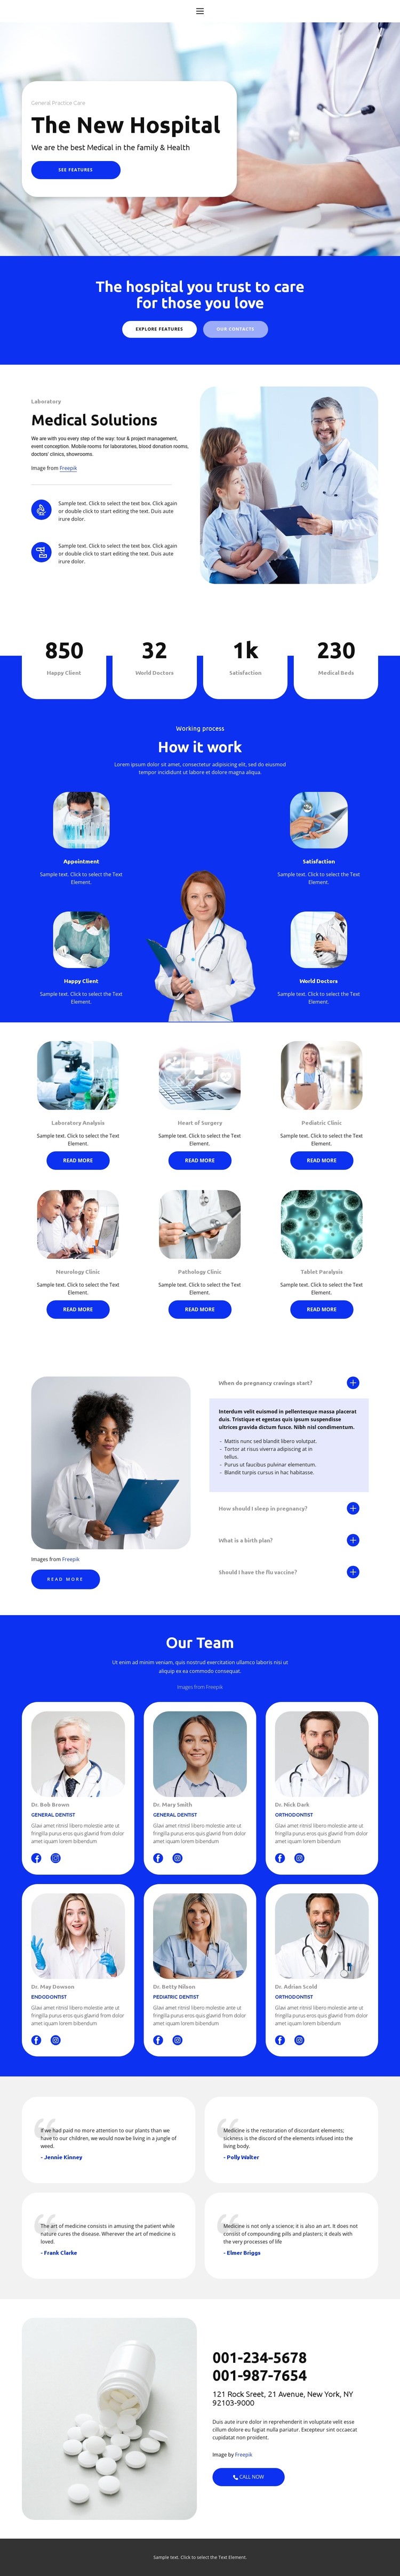 The New Hospital CSS Template